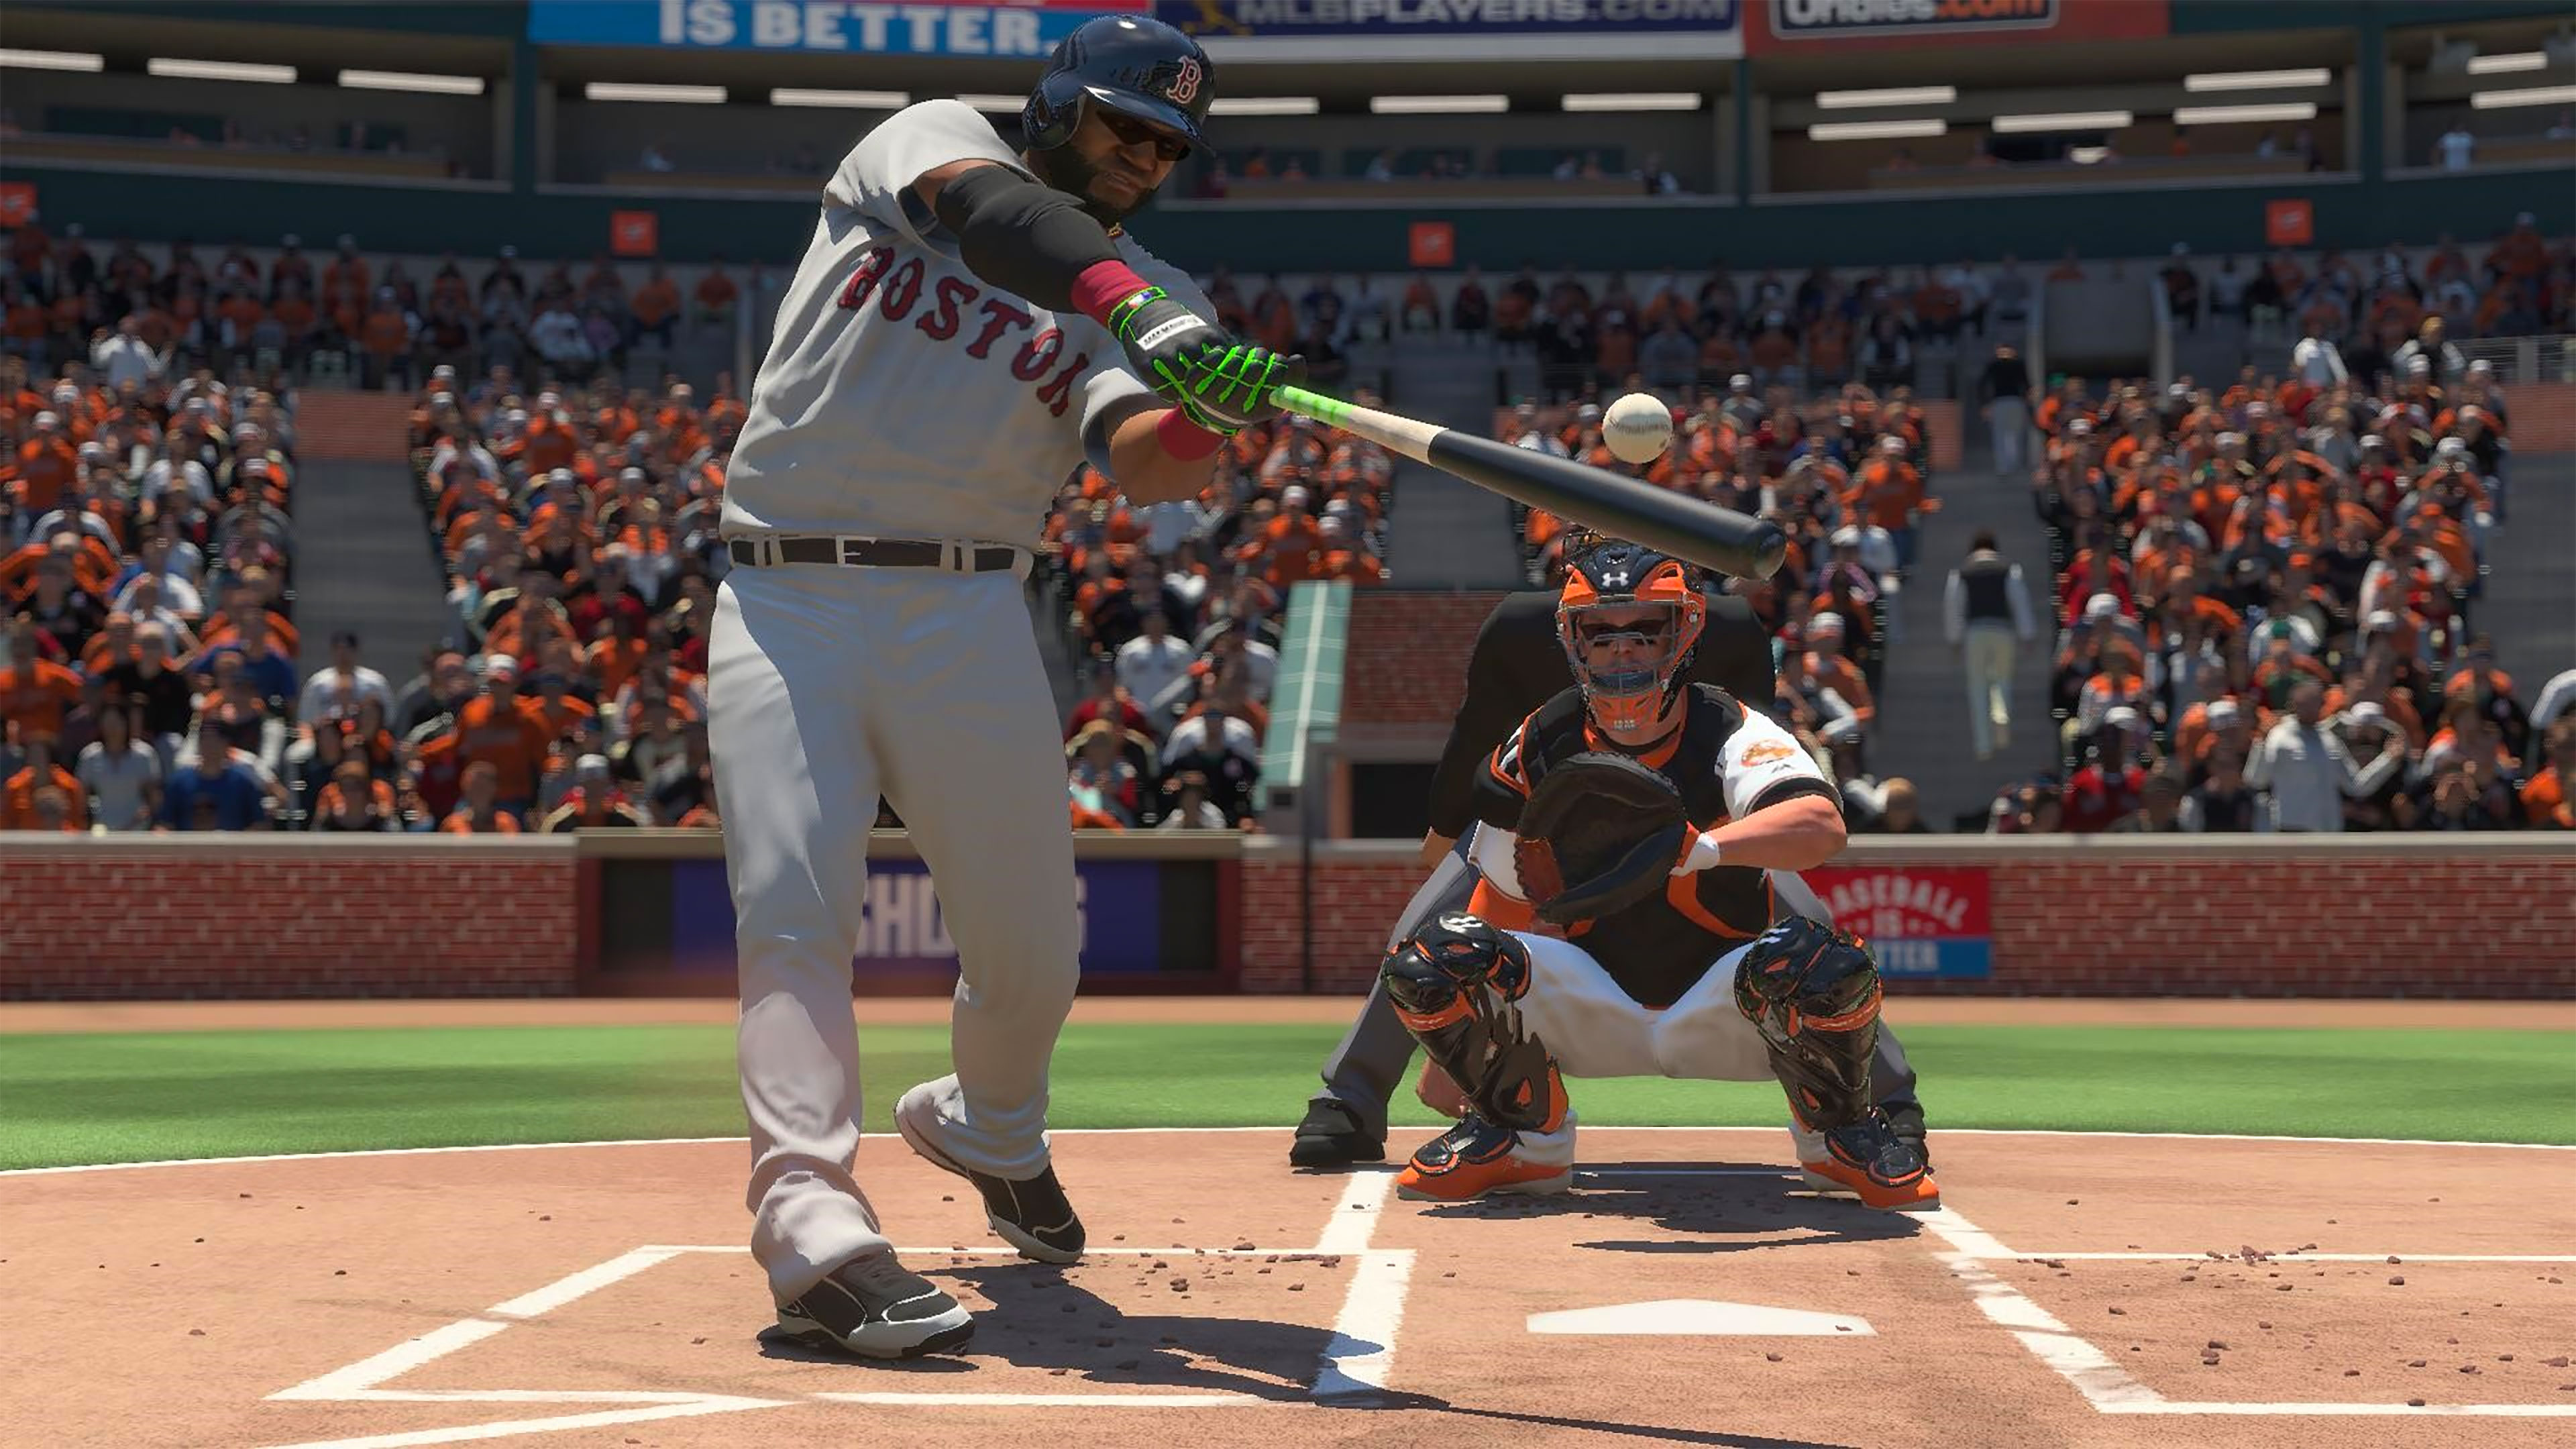 MLB The Show 17 Wallpapers in Ultra HD 4K.